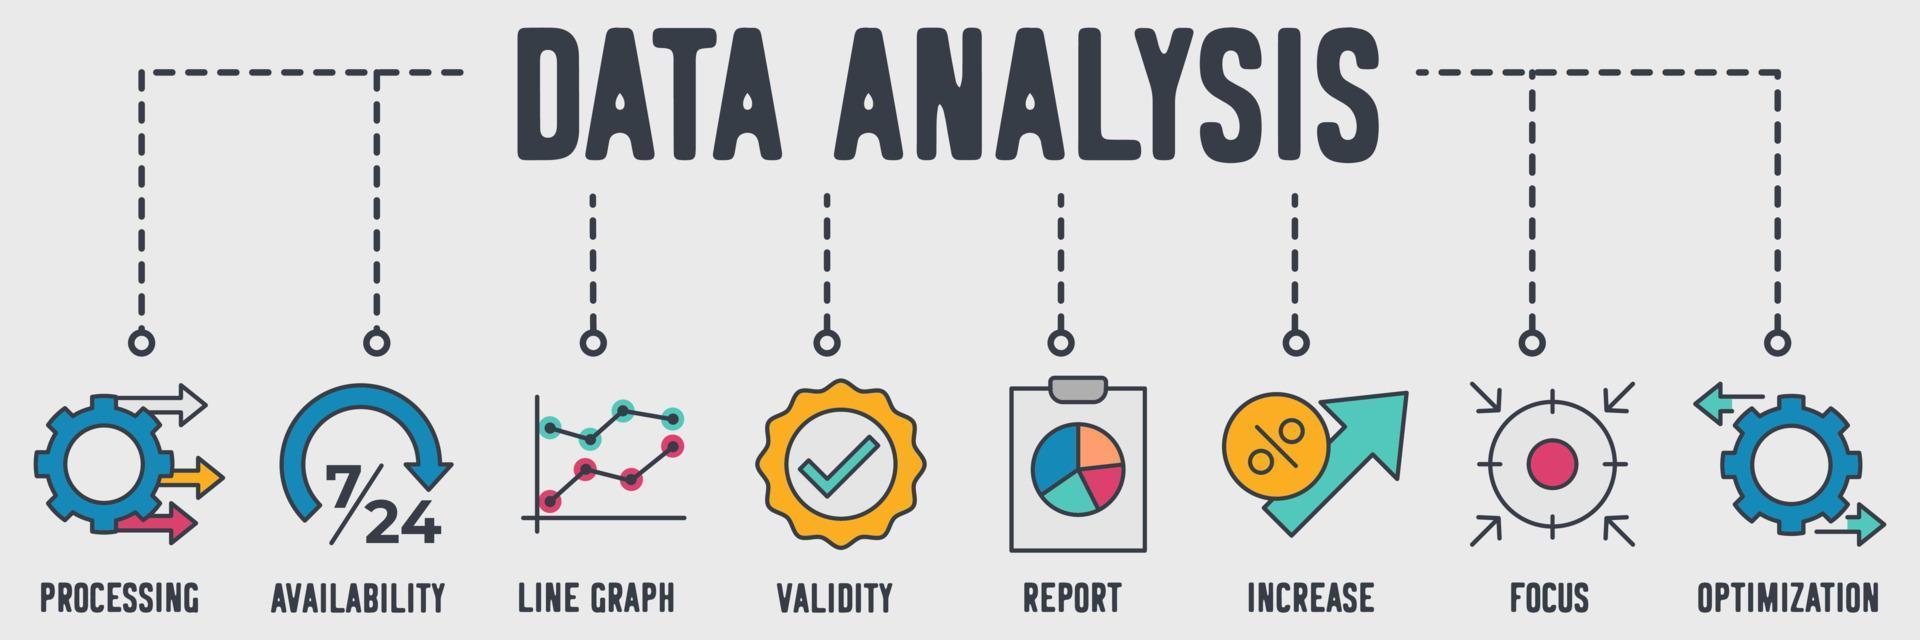 Data analysis banner web icon. processing, availability, line graph, validity, report, increase, focus, optimization vector illustration concept.